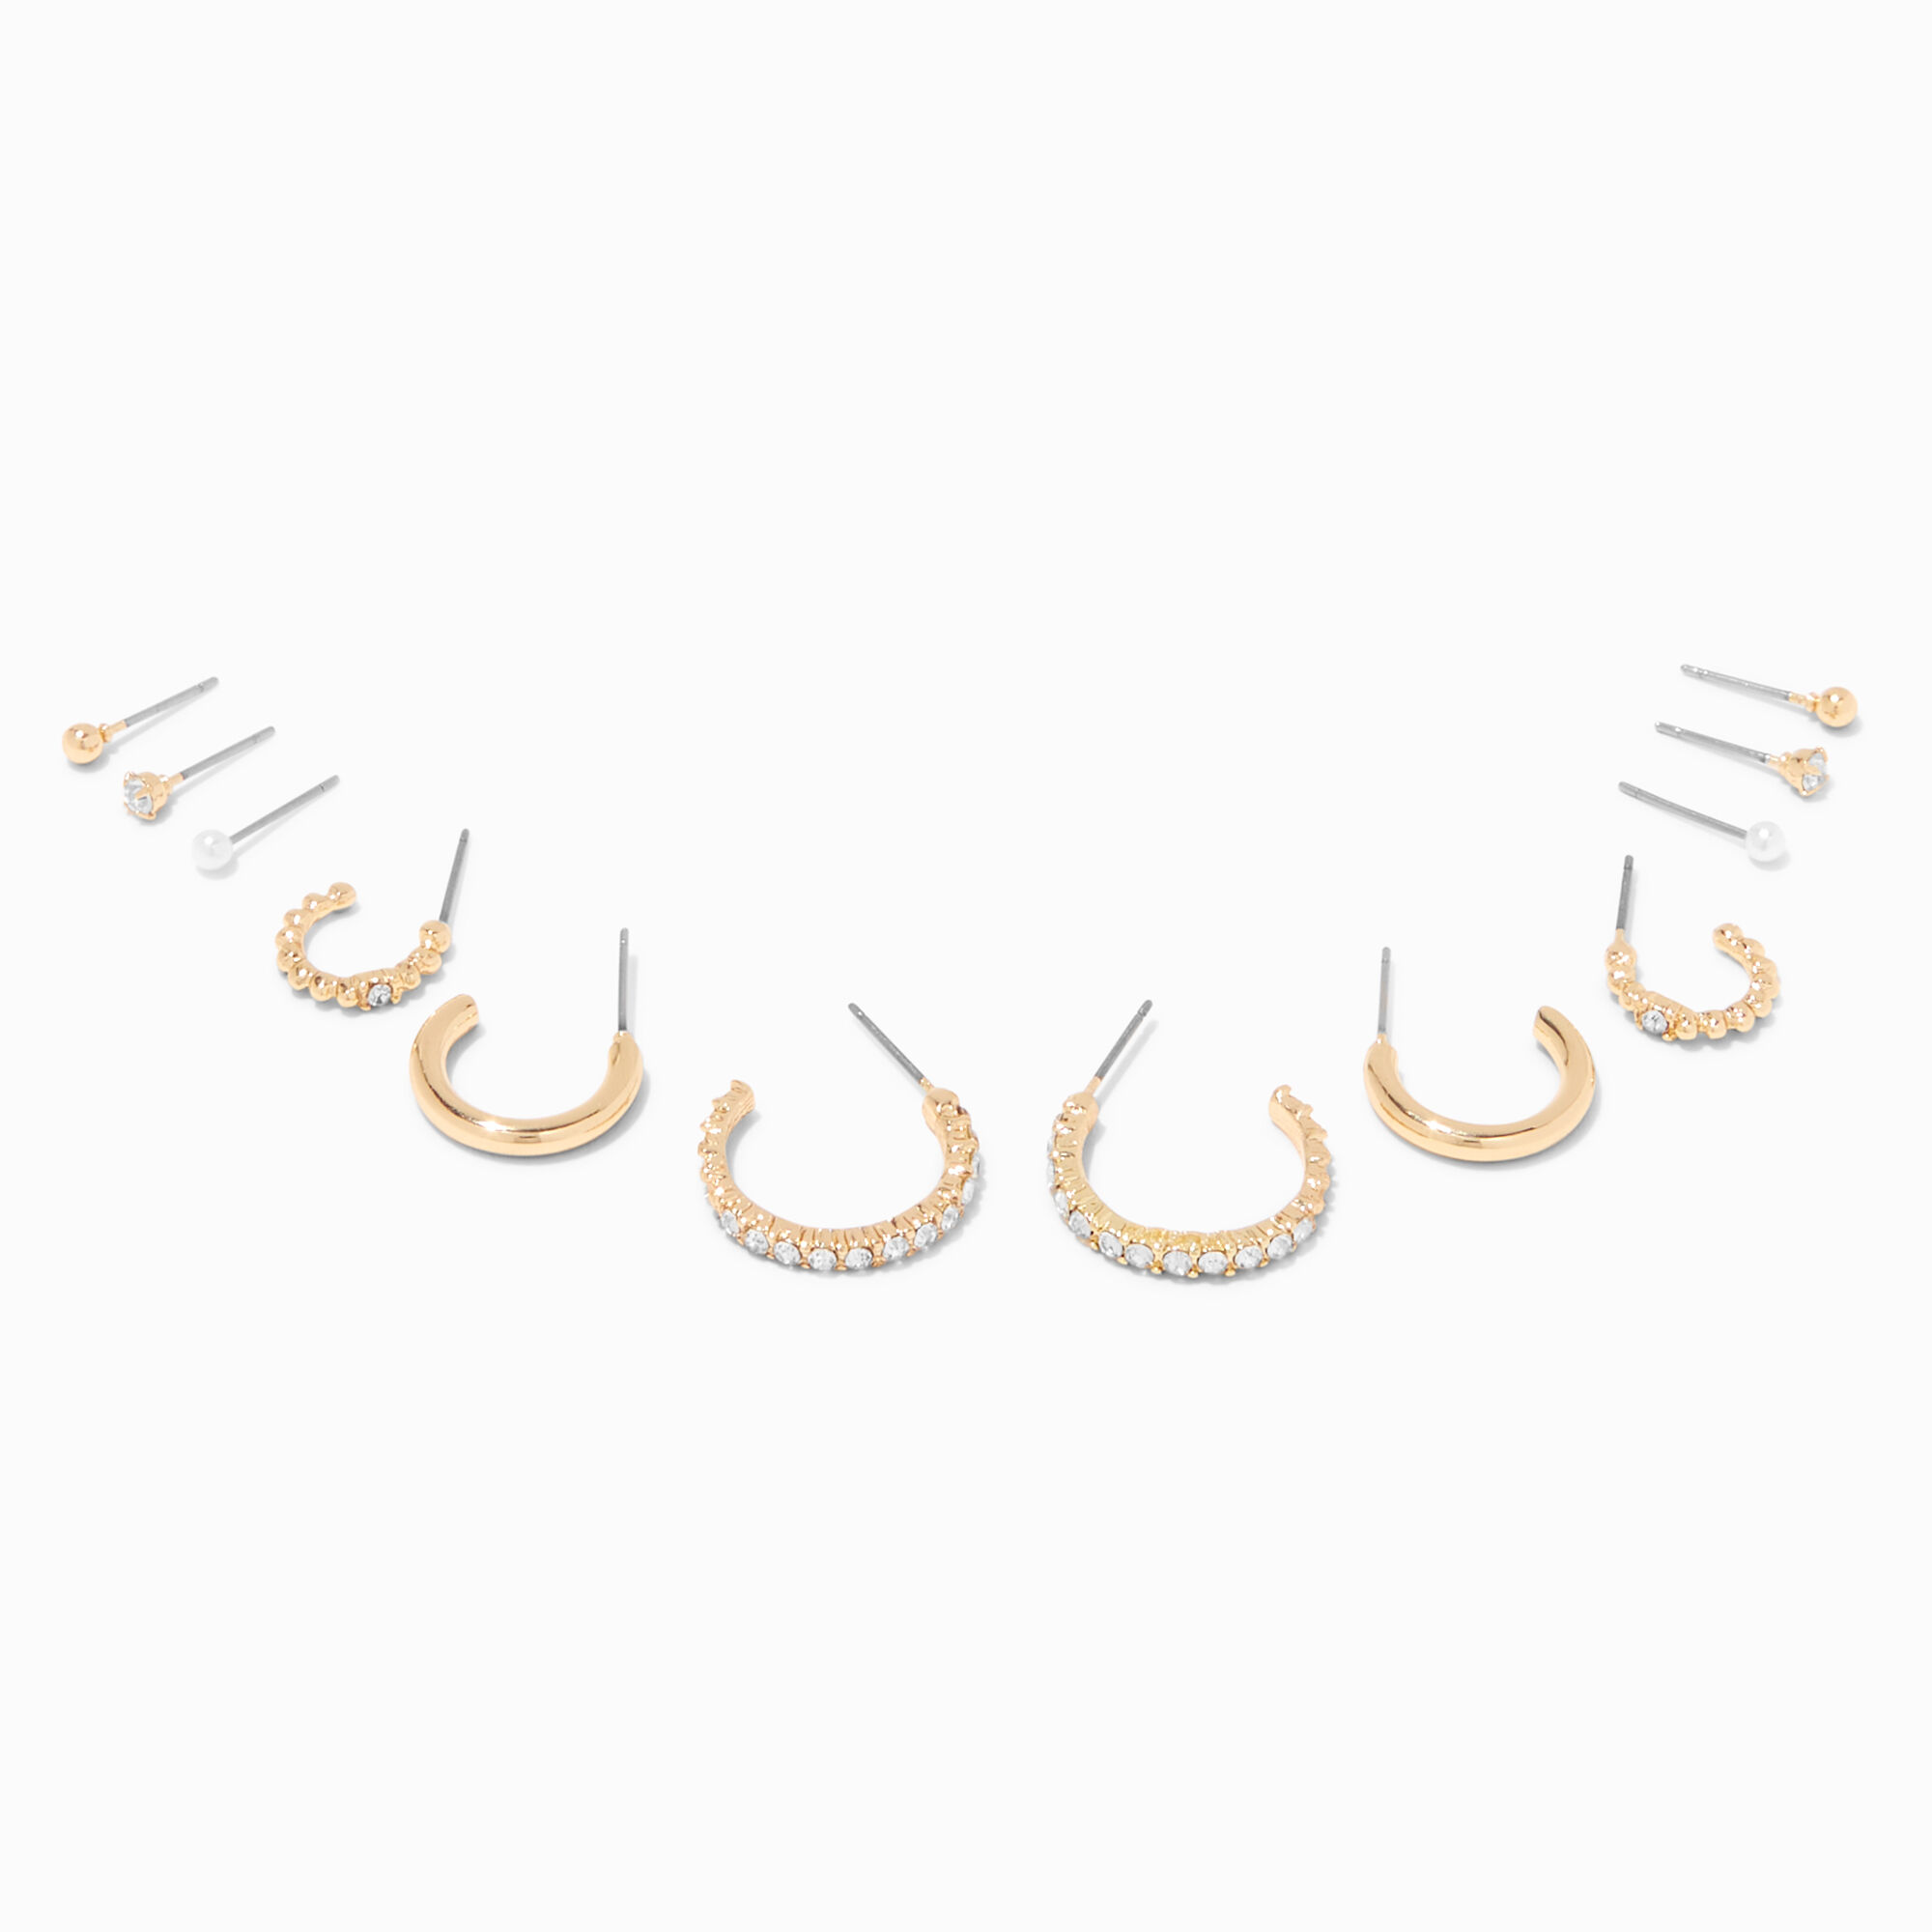 View Claires Tone 15MM Crystal Hoop Earrings Stackables Set 6 Pack Gold information